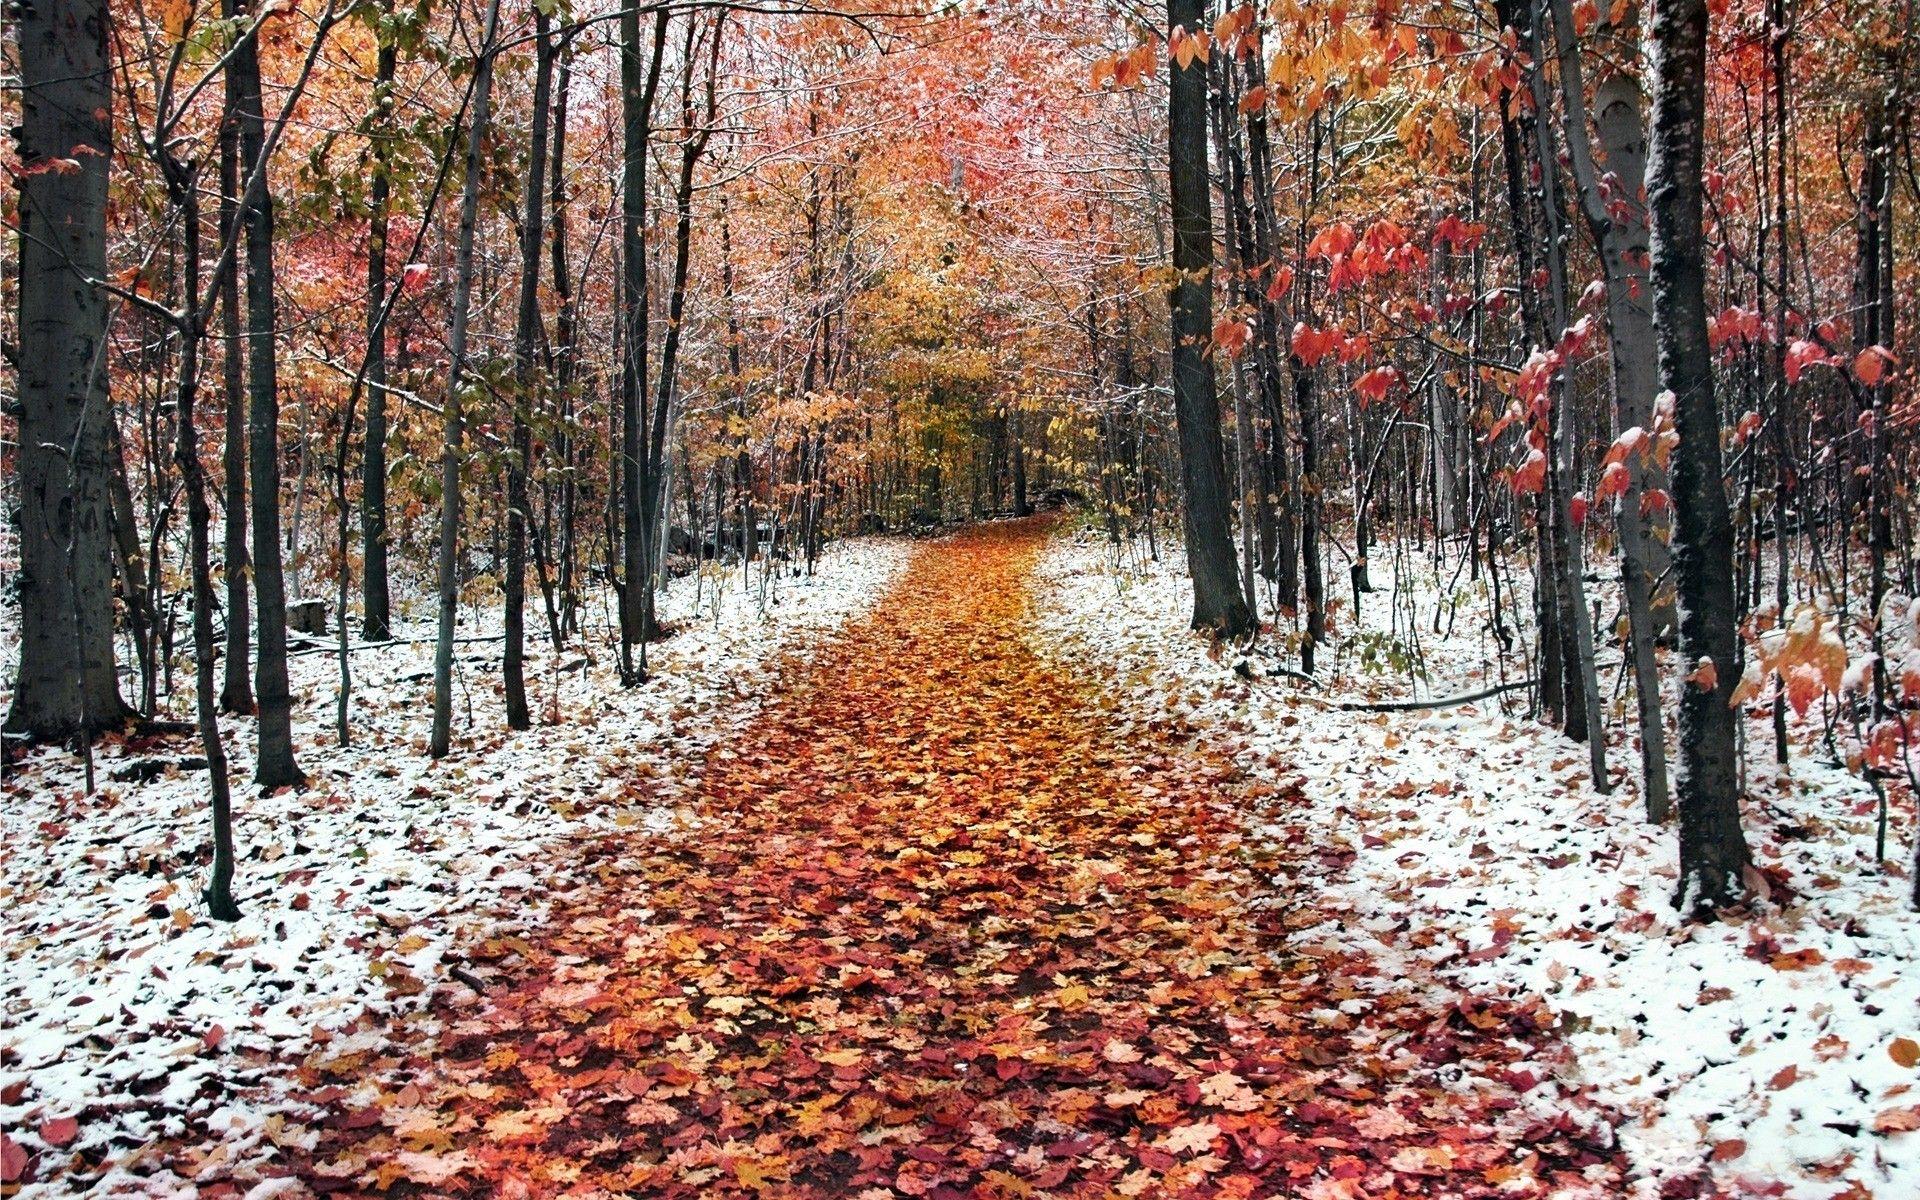 Late autumn the first snow fell wallpaper and image. Winter nature, Nature wallpaper, Fall wallpaper